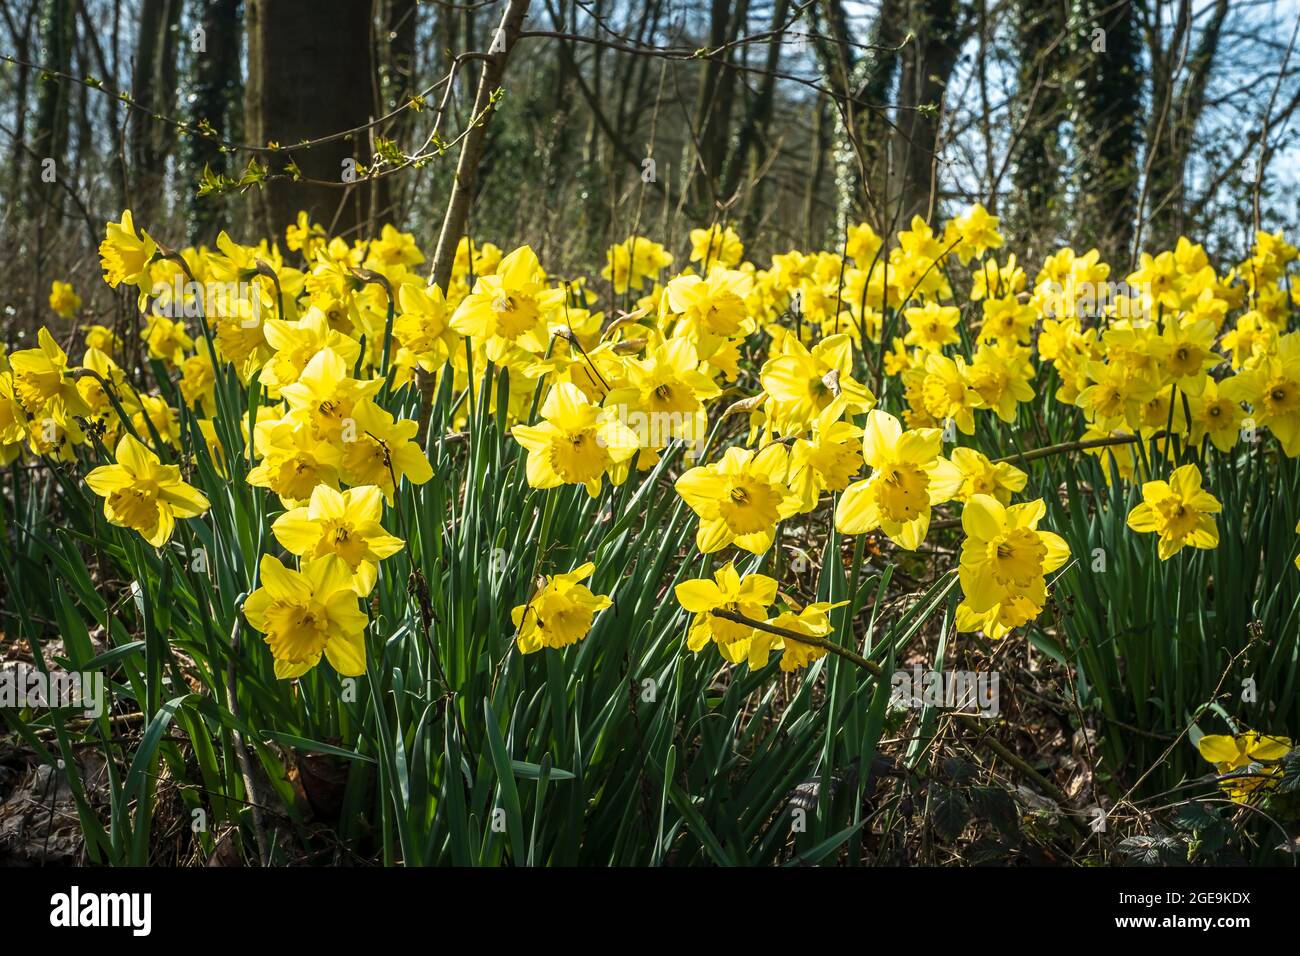 Daffodils growing in woodland. Stock Photo